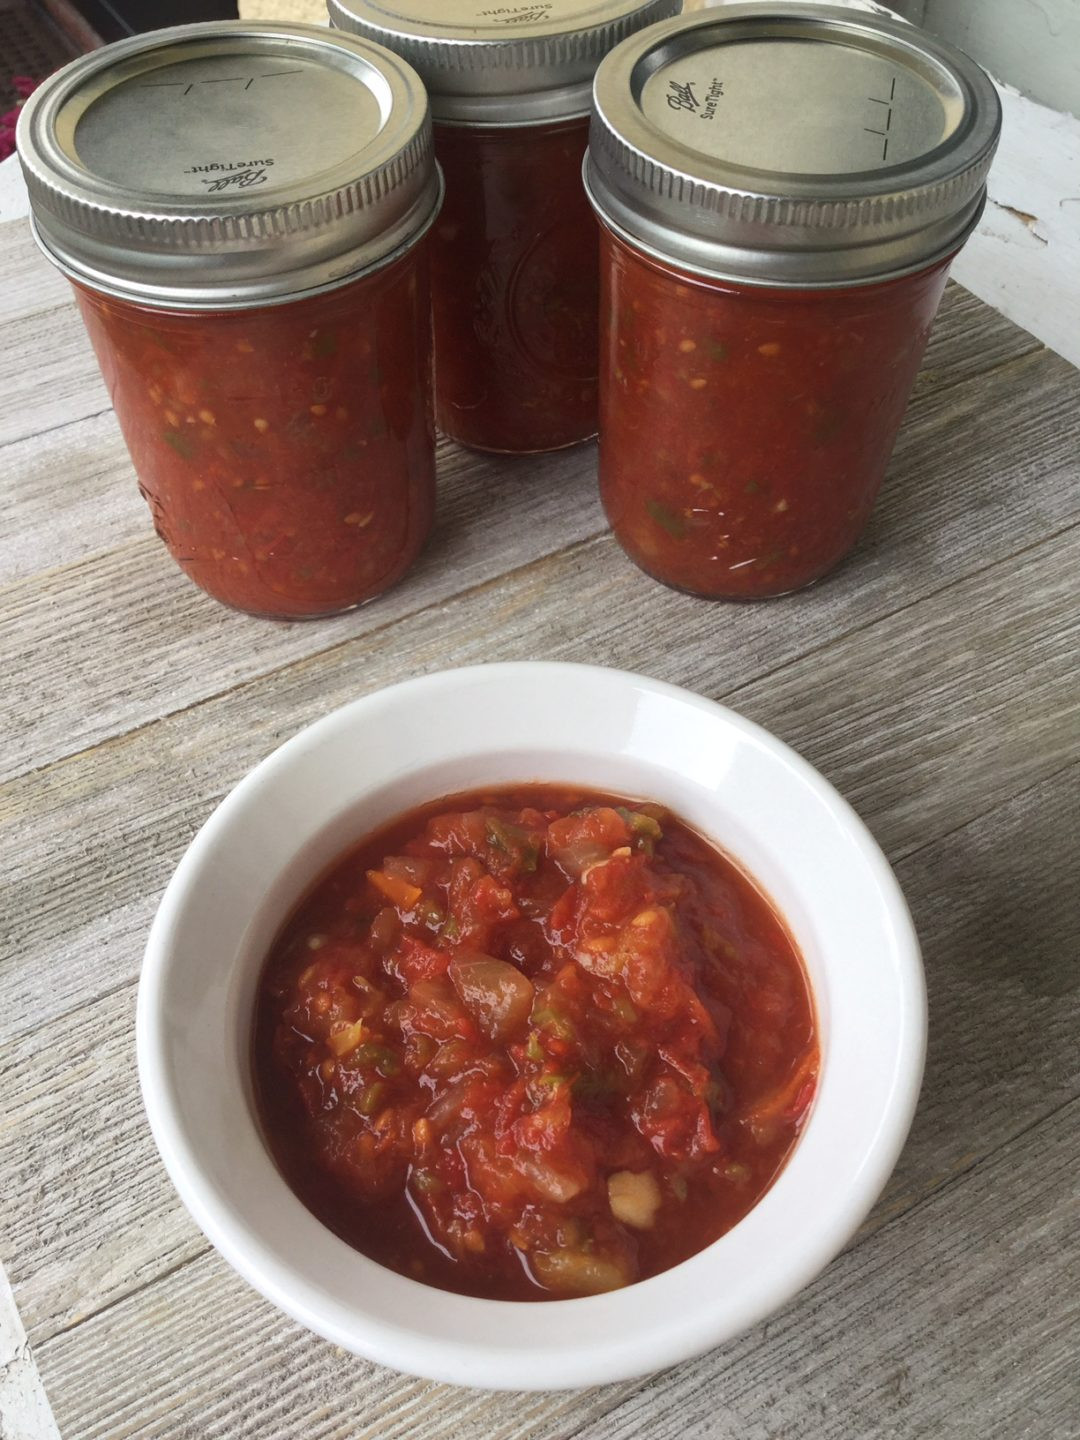 Tomato Salsa Recipe For Canning
 The Best Homemade Salsa for Canning My Healthy